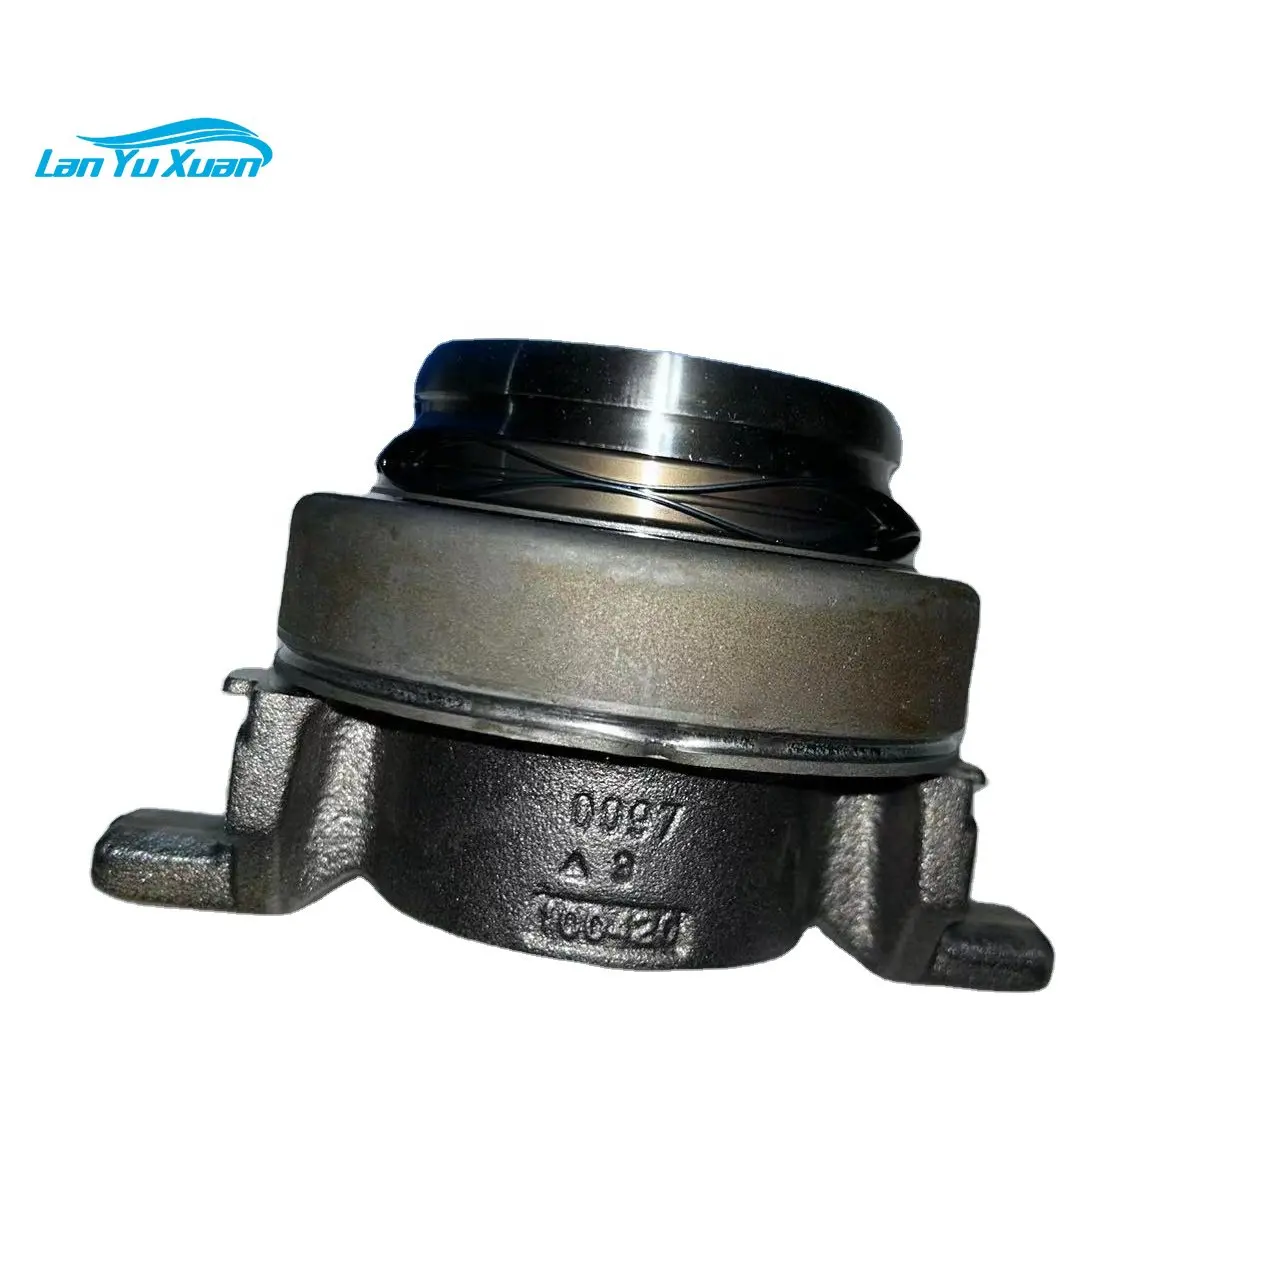 3151000157 3151001043 Release bearing 0501003634  0501008442  0501009056  V-OLVO S-CANIA DAF European truck Parts